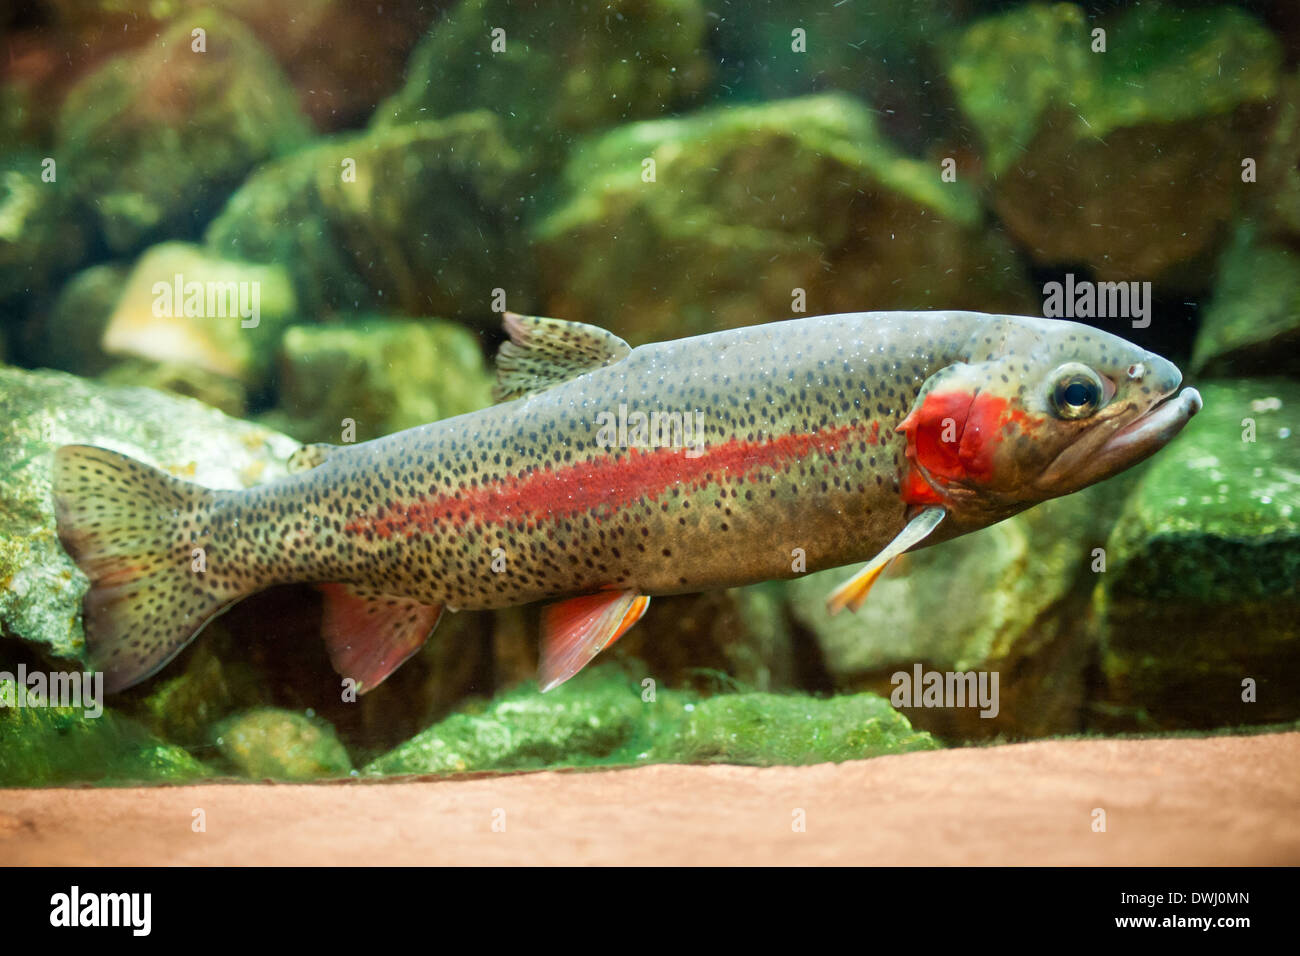 A male rainbow trout (Oncorhynchus mykiss) in an aquarium at the Royal Alberta Museum, in Edmonton, Alberta, Canada. Stock Photo